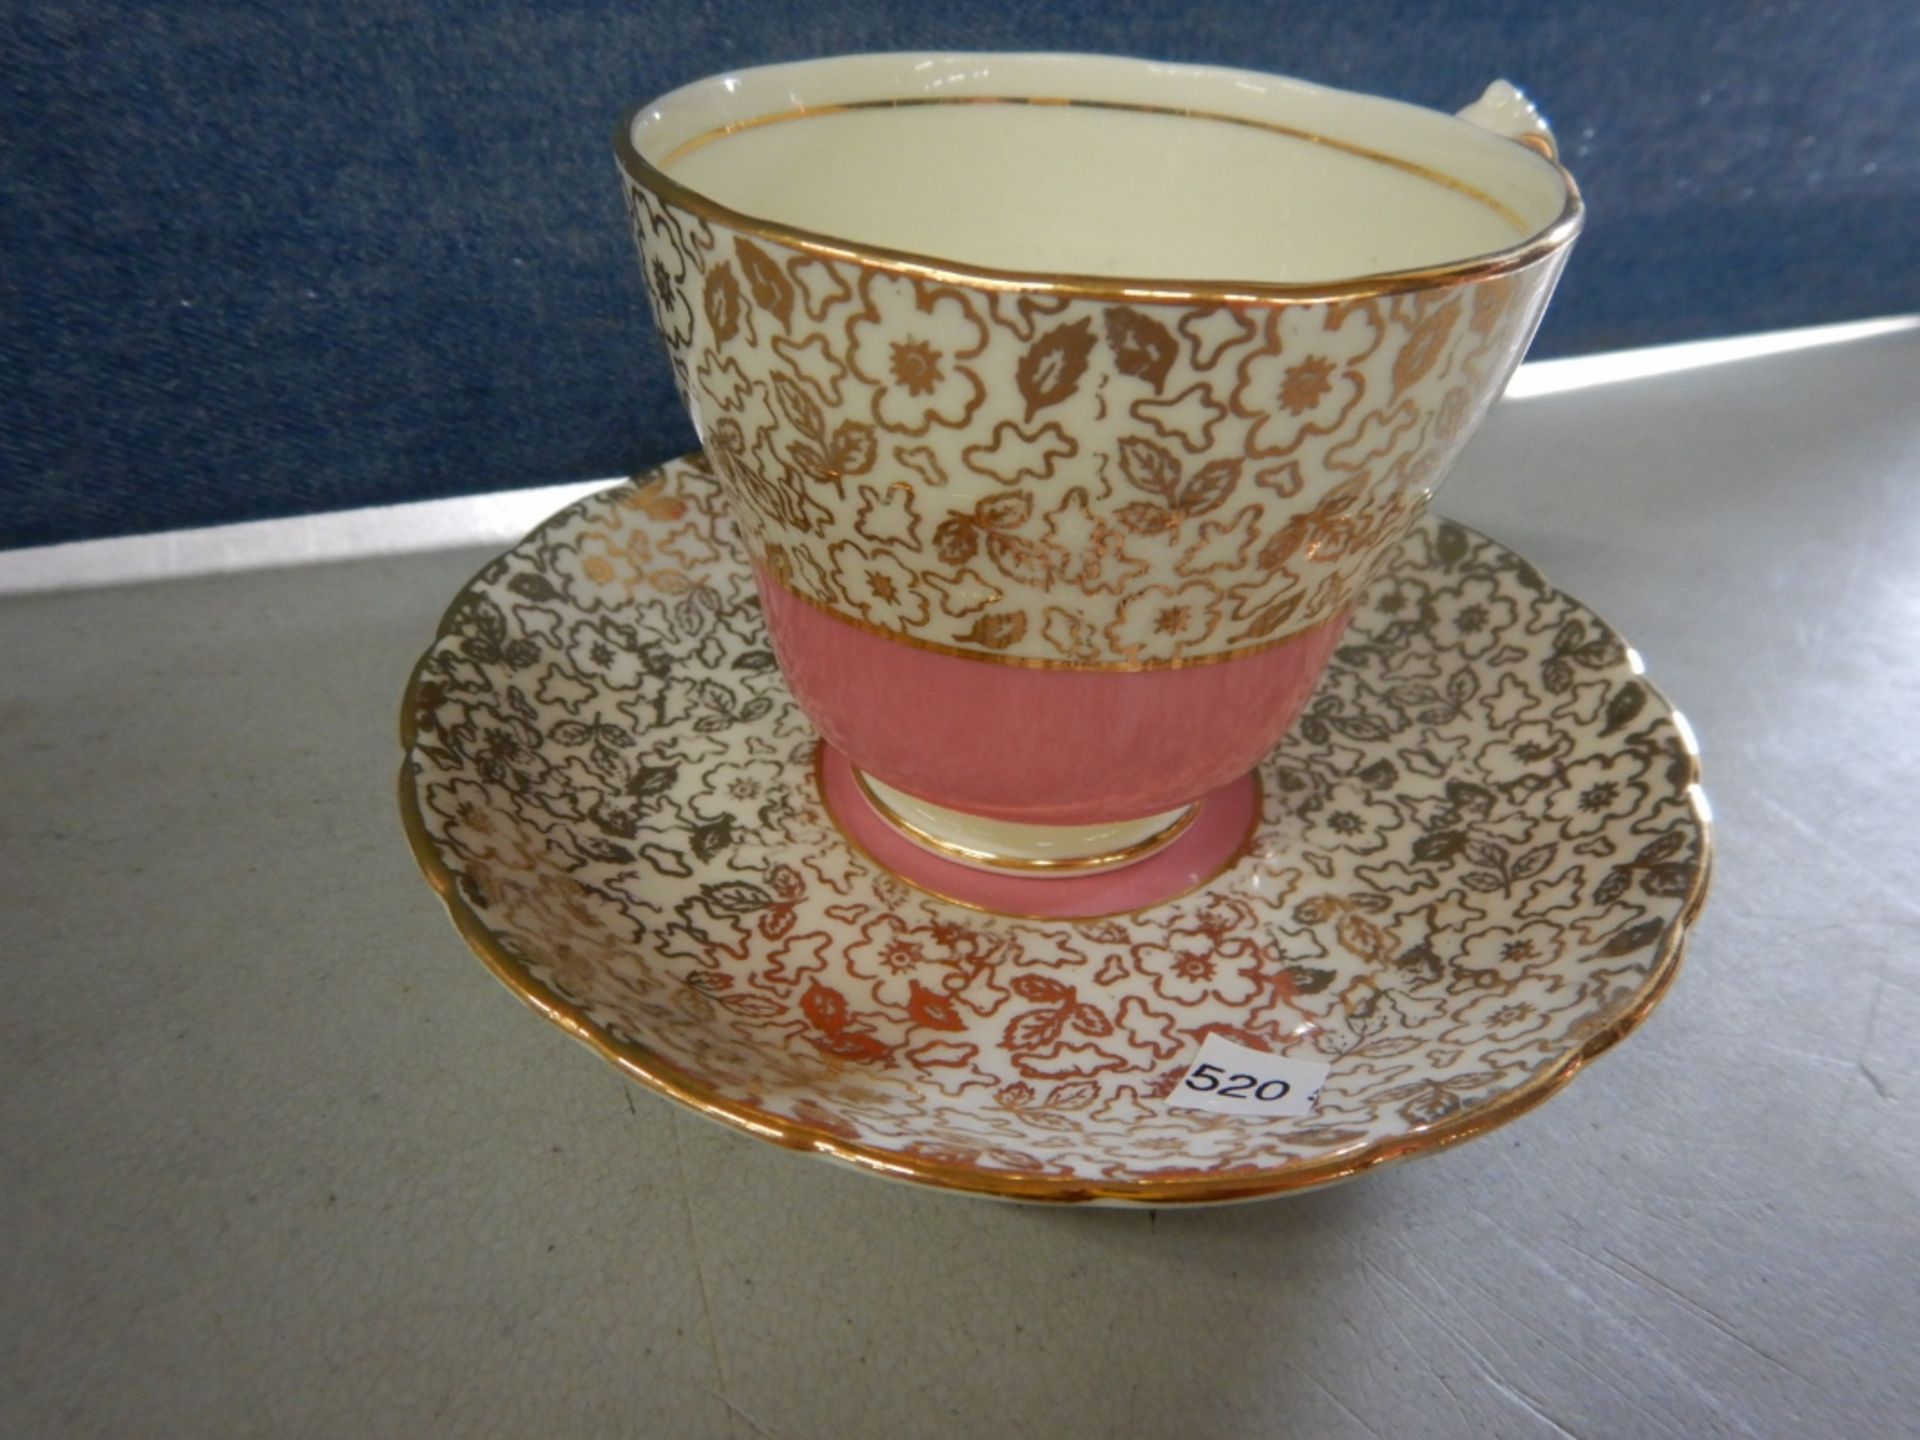 ANTIQUE TEACUP & SAUCER- MADE IN ENGLAND - FINE BONE CHINA "ROYAL CHELSEA" - #3776A - Image 2 of 5